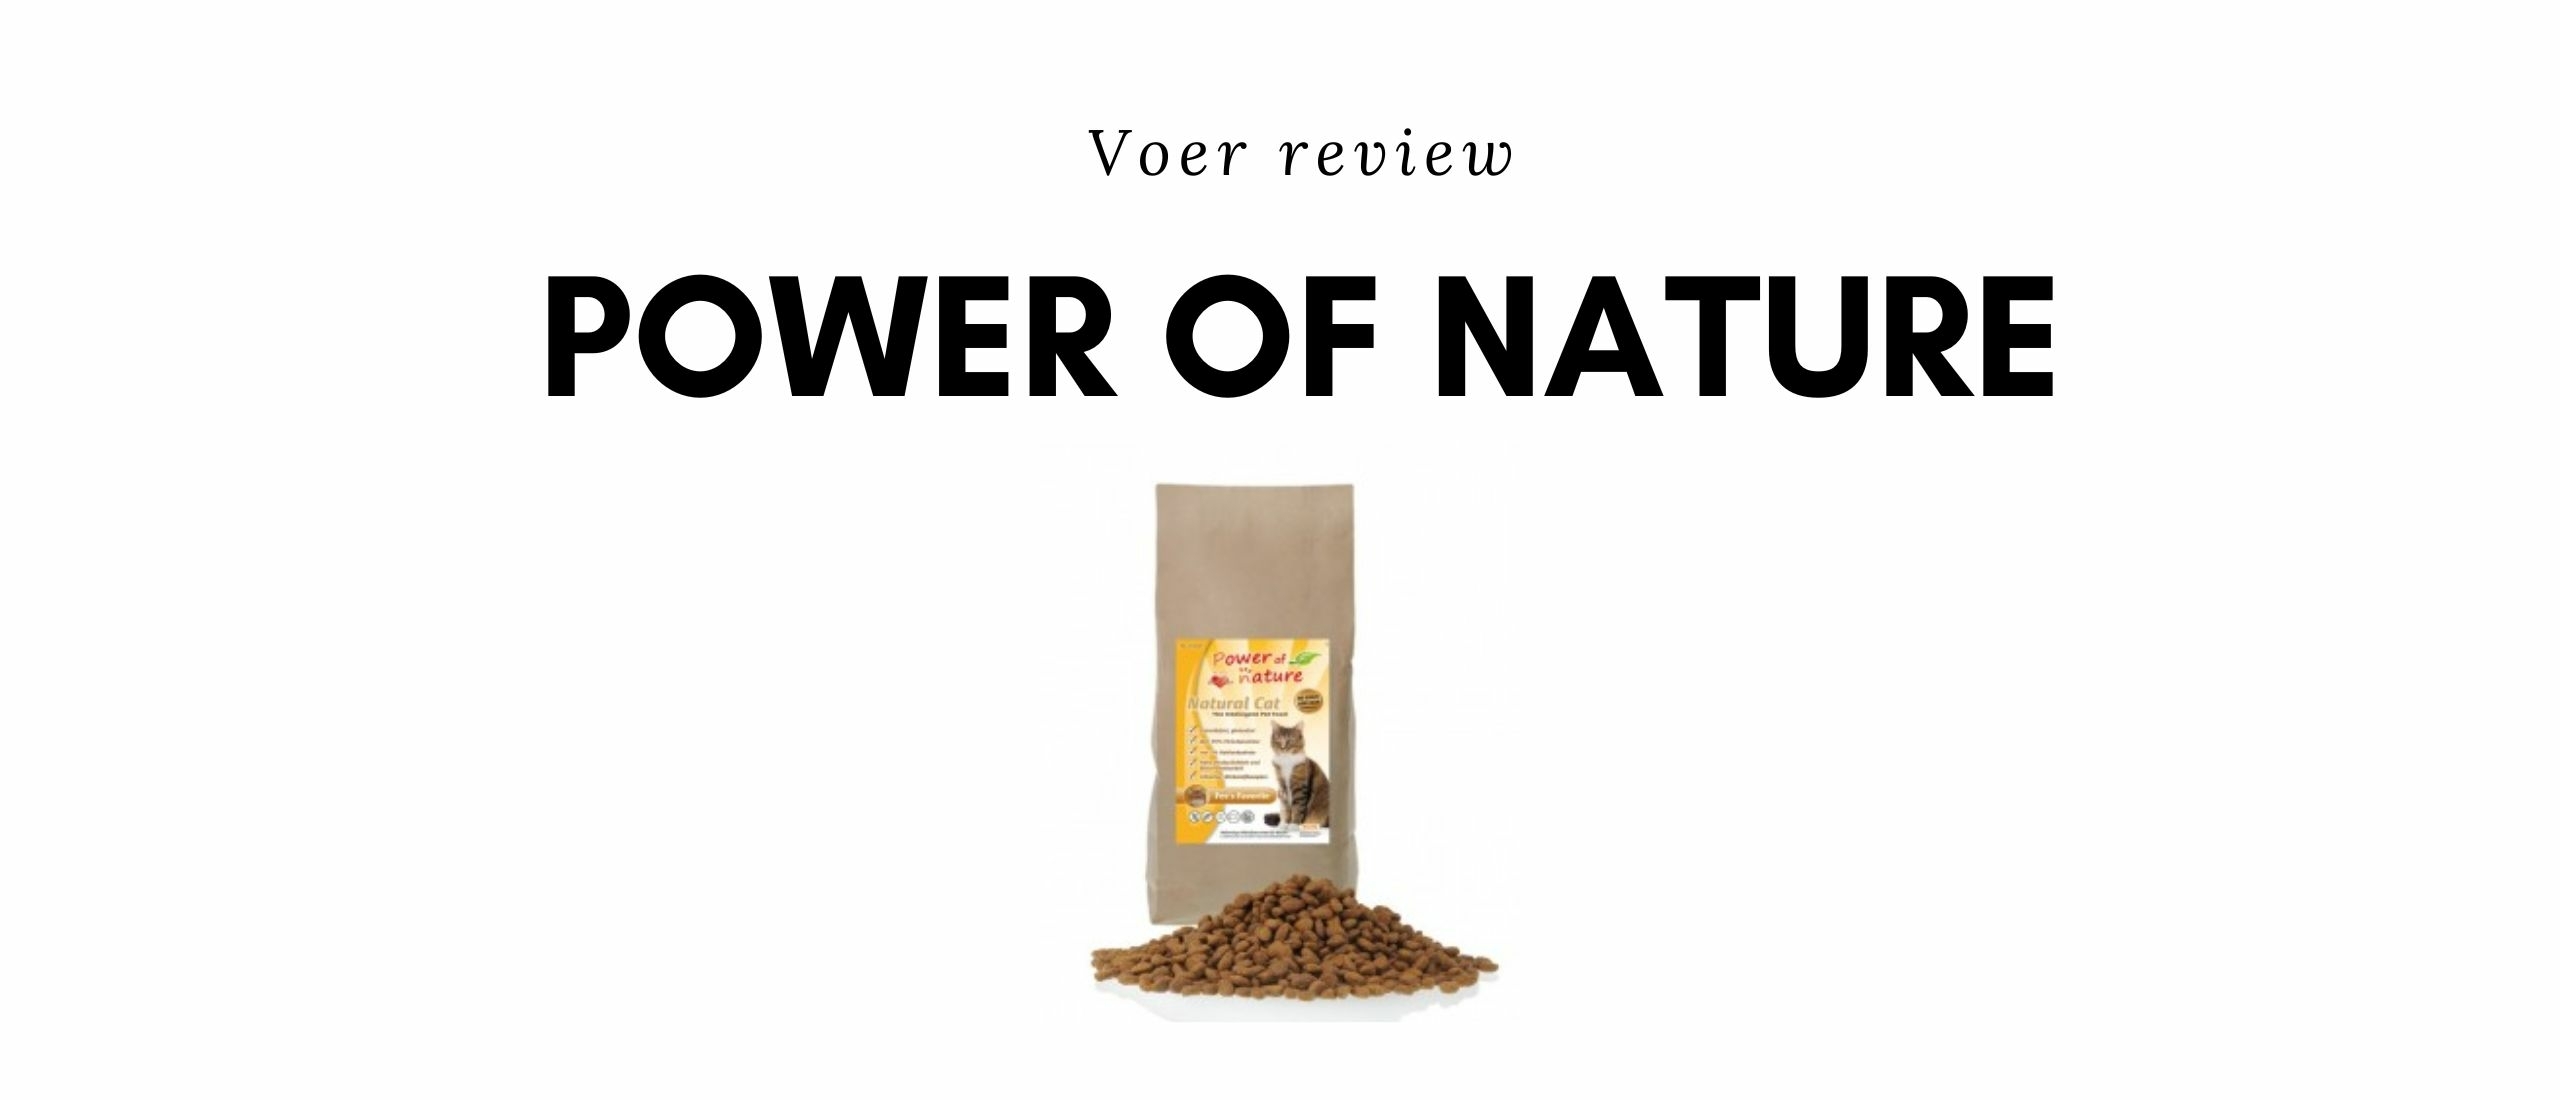 Voer Review Power of Nature